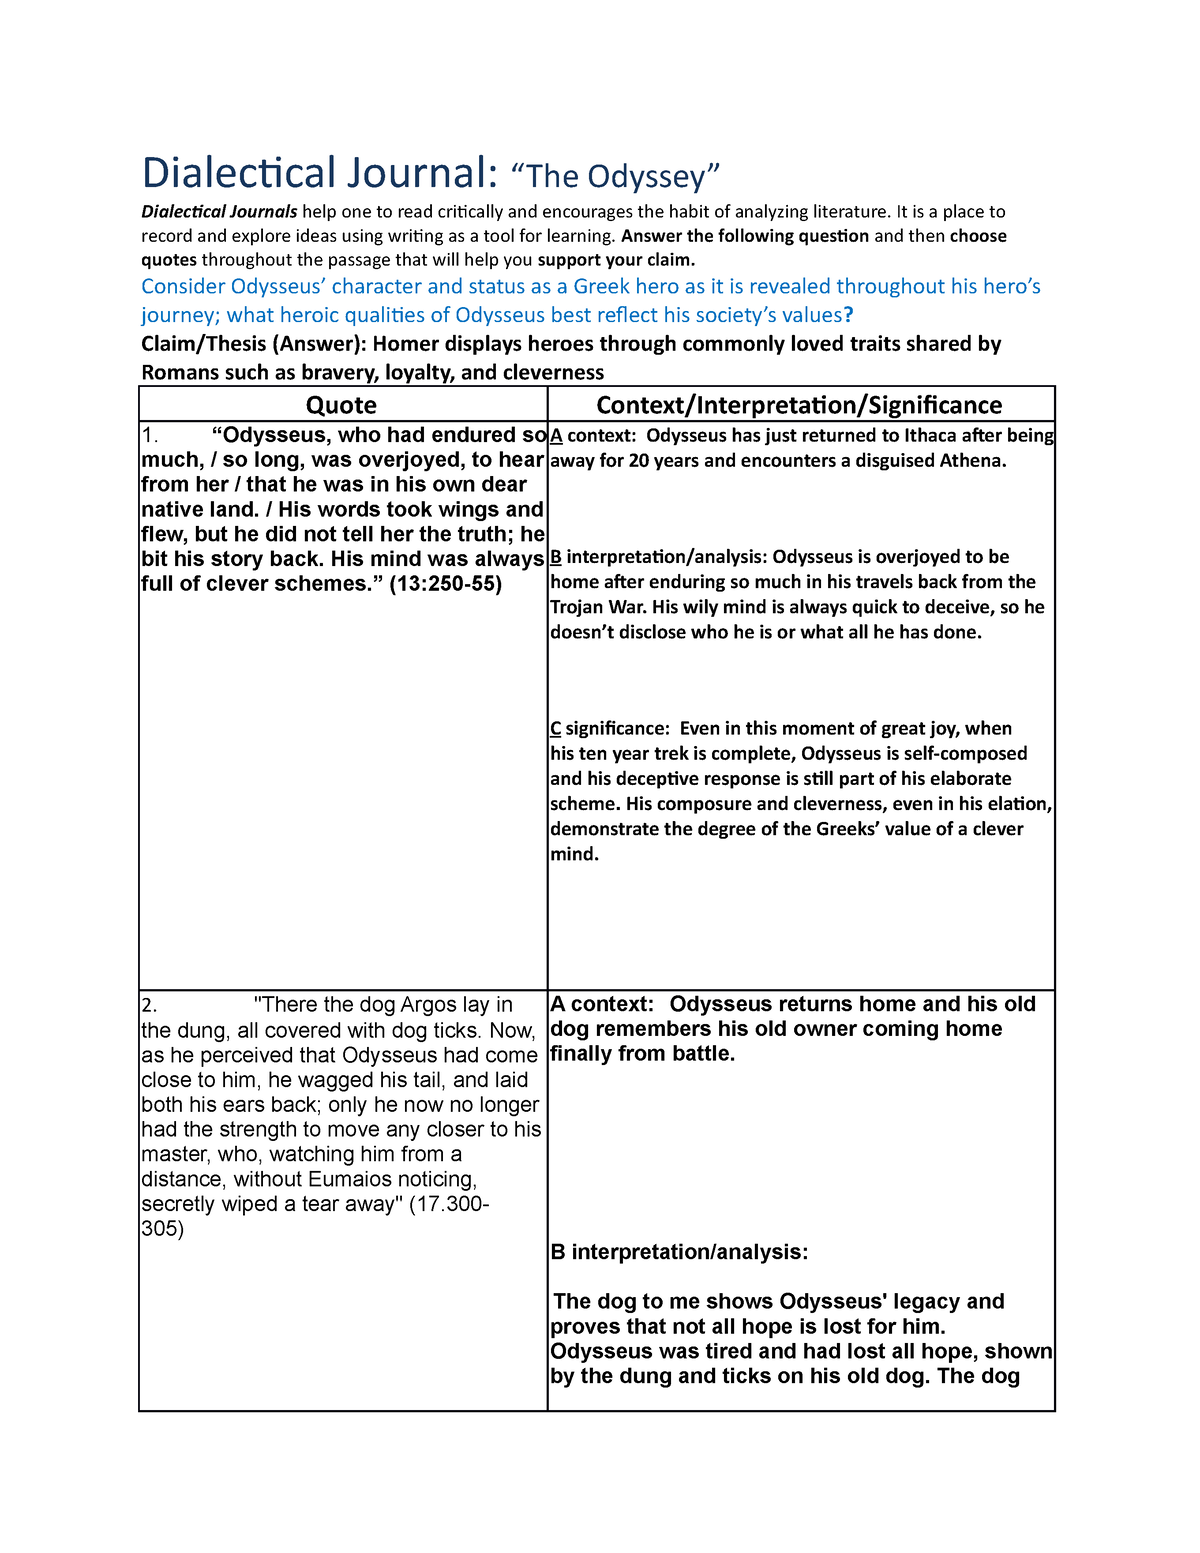 dialectical journals for synthesis essay sources